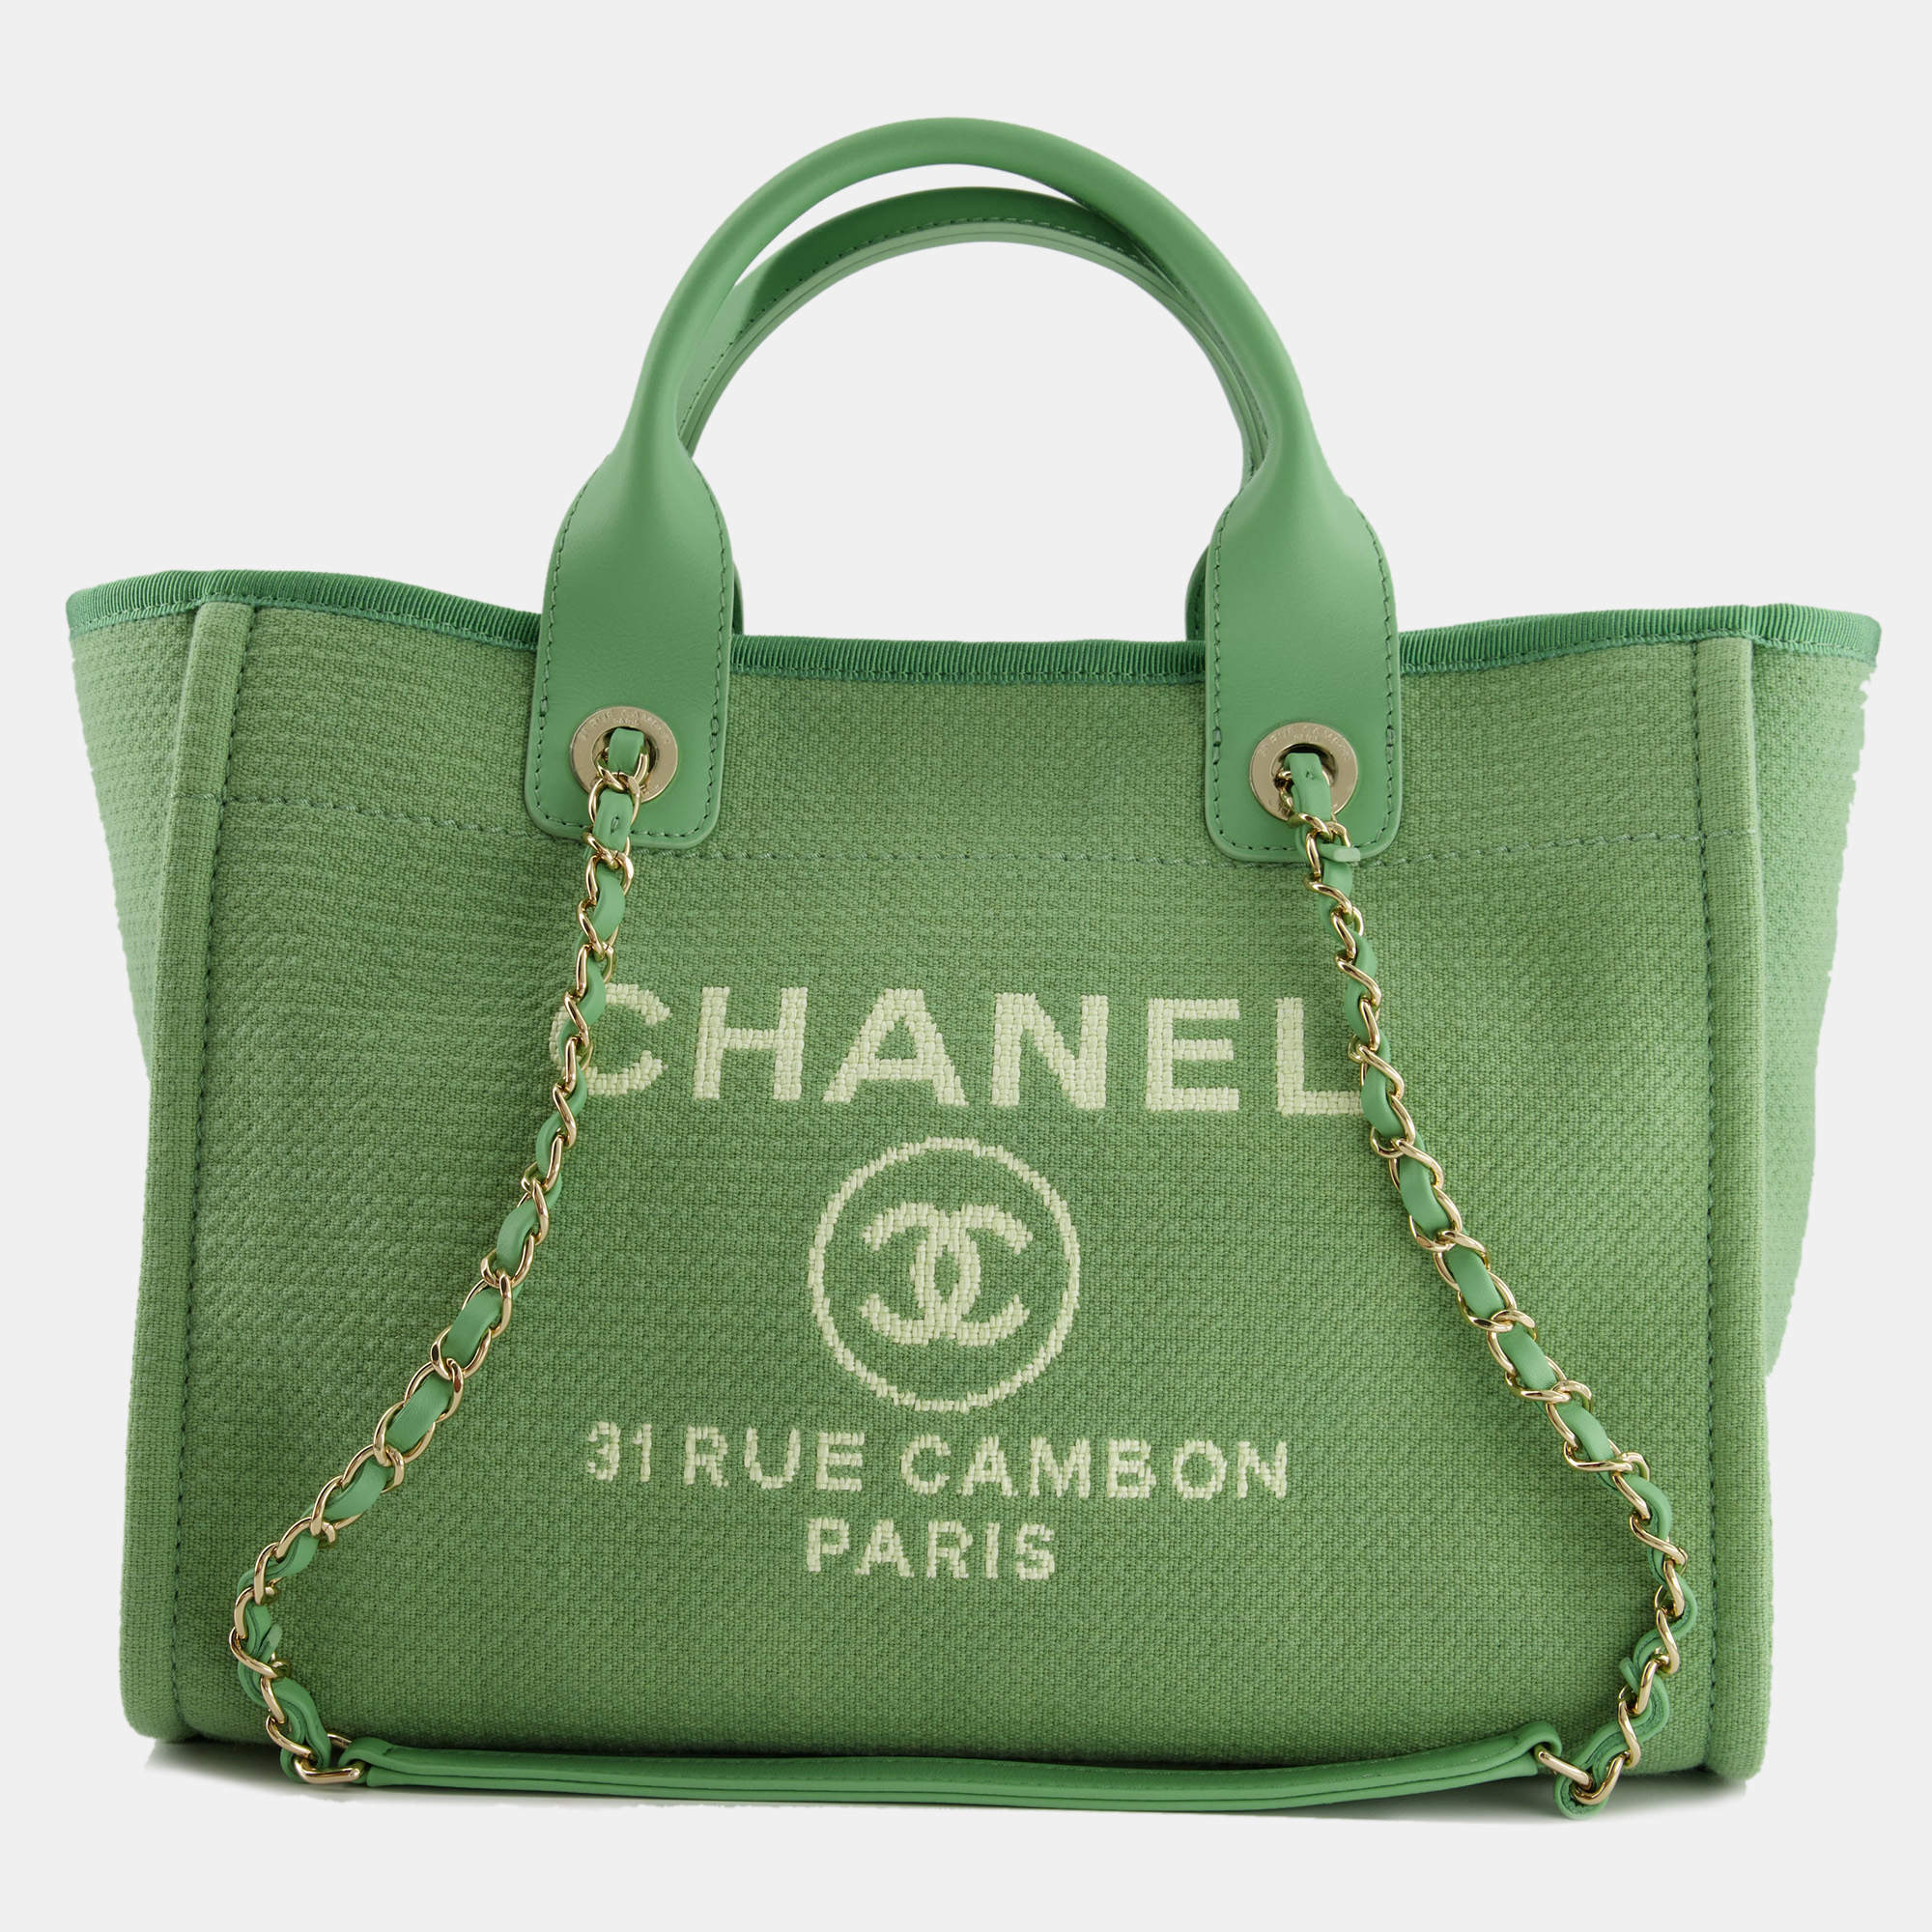 Chanel Pistachio Green Canvas Small Deauville Tote Bag with Champagne Gold  Hardware Chanel